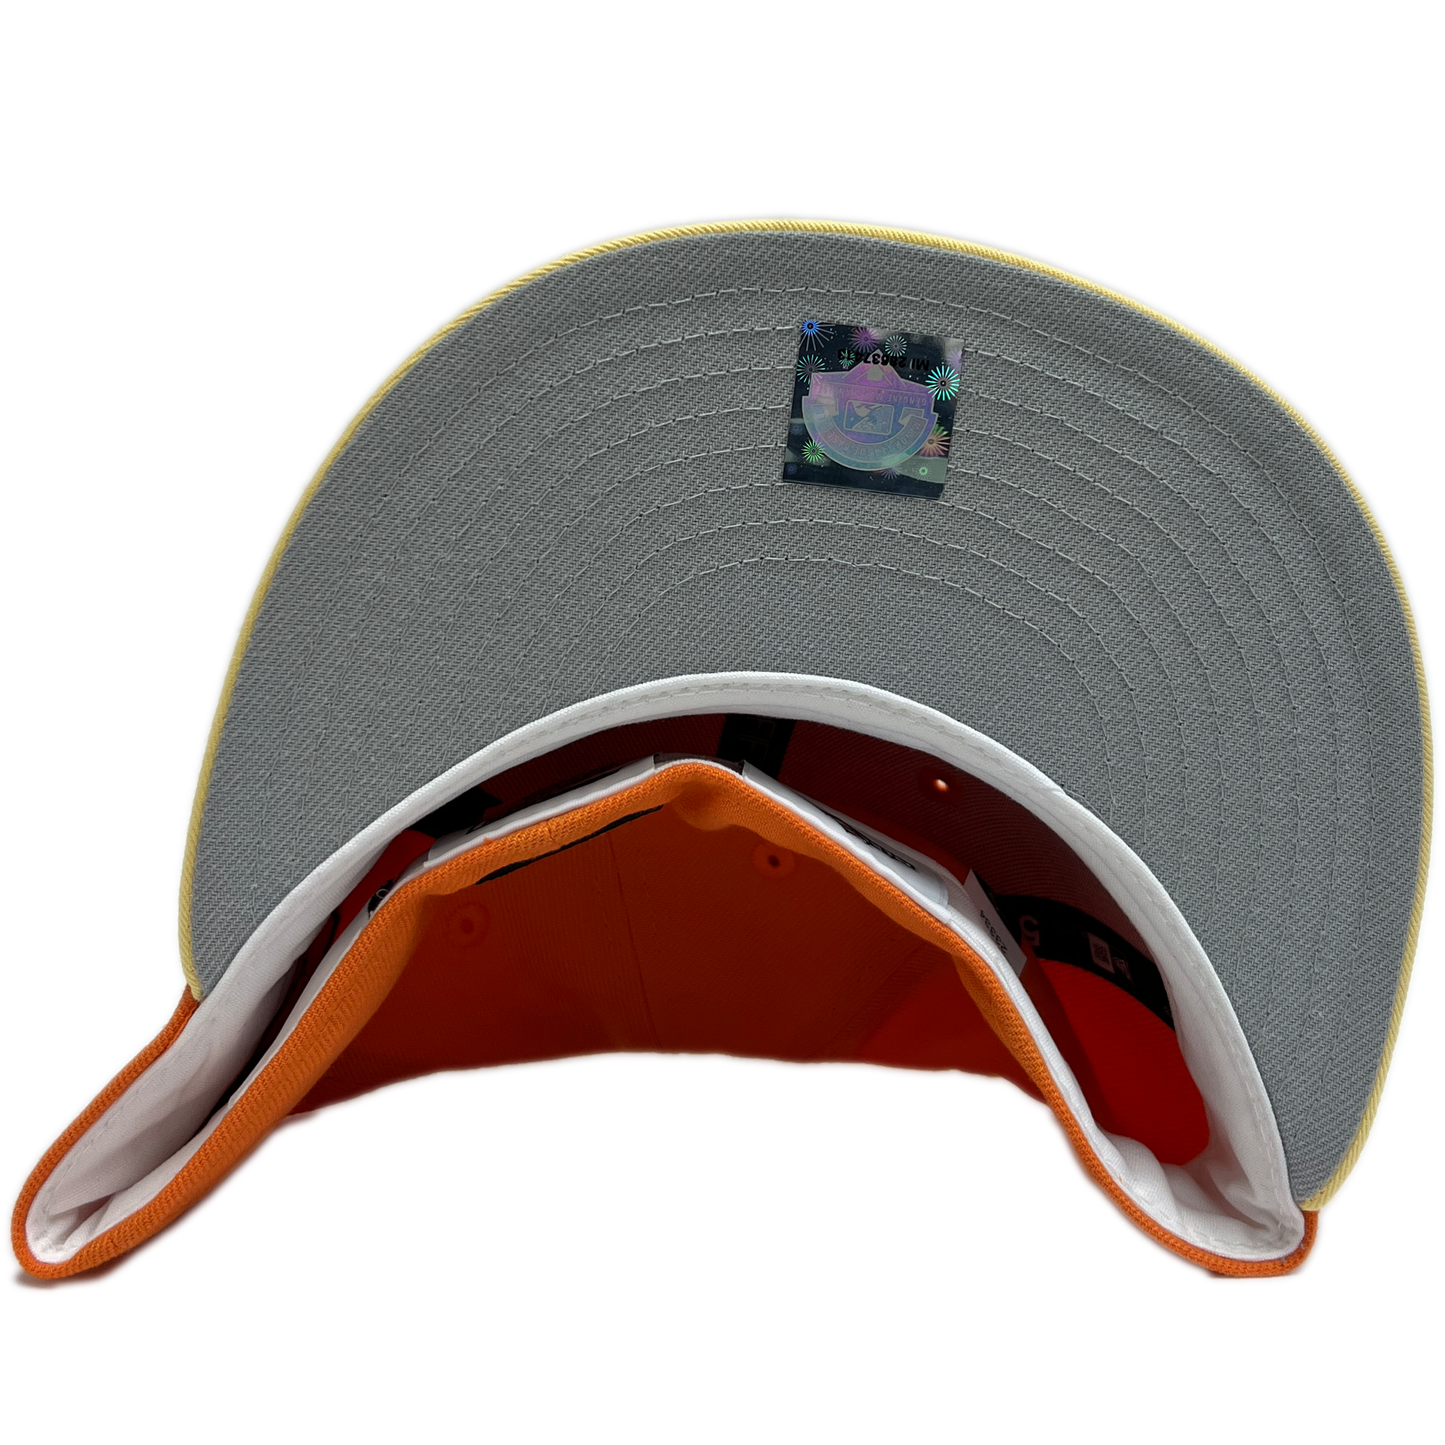 New Era Chattanooga Lookouts 59Fifty Fitted Hat - Orange/ Yellow